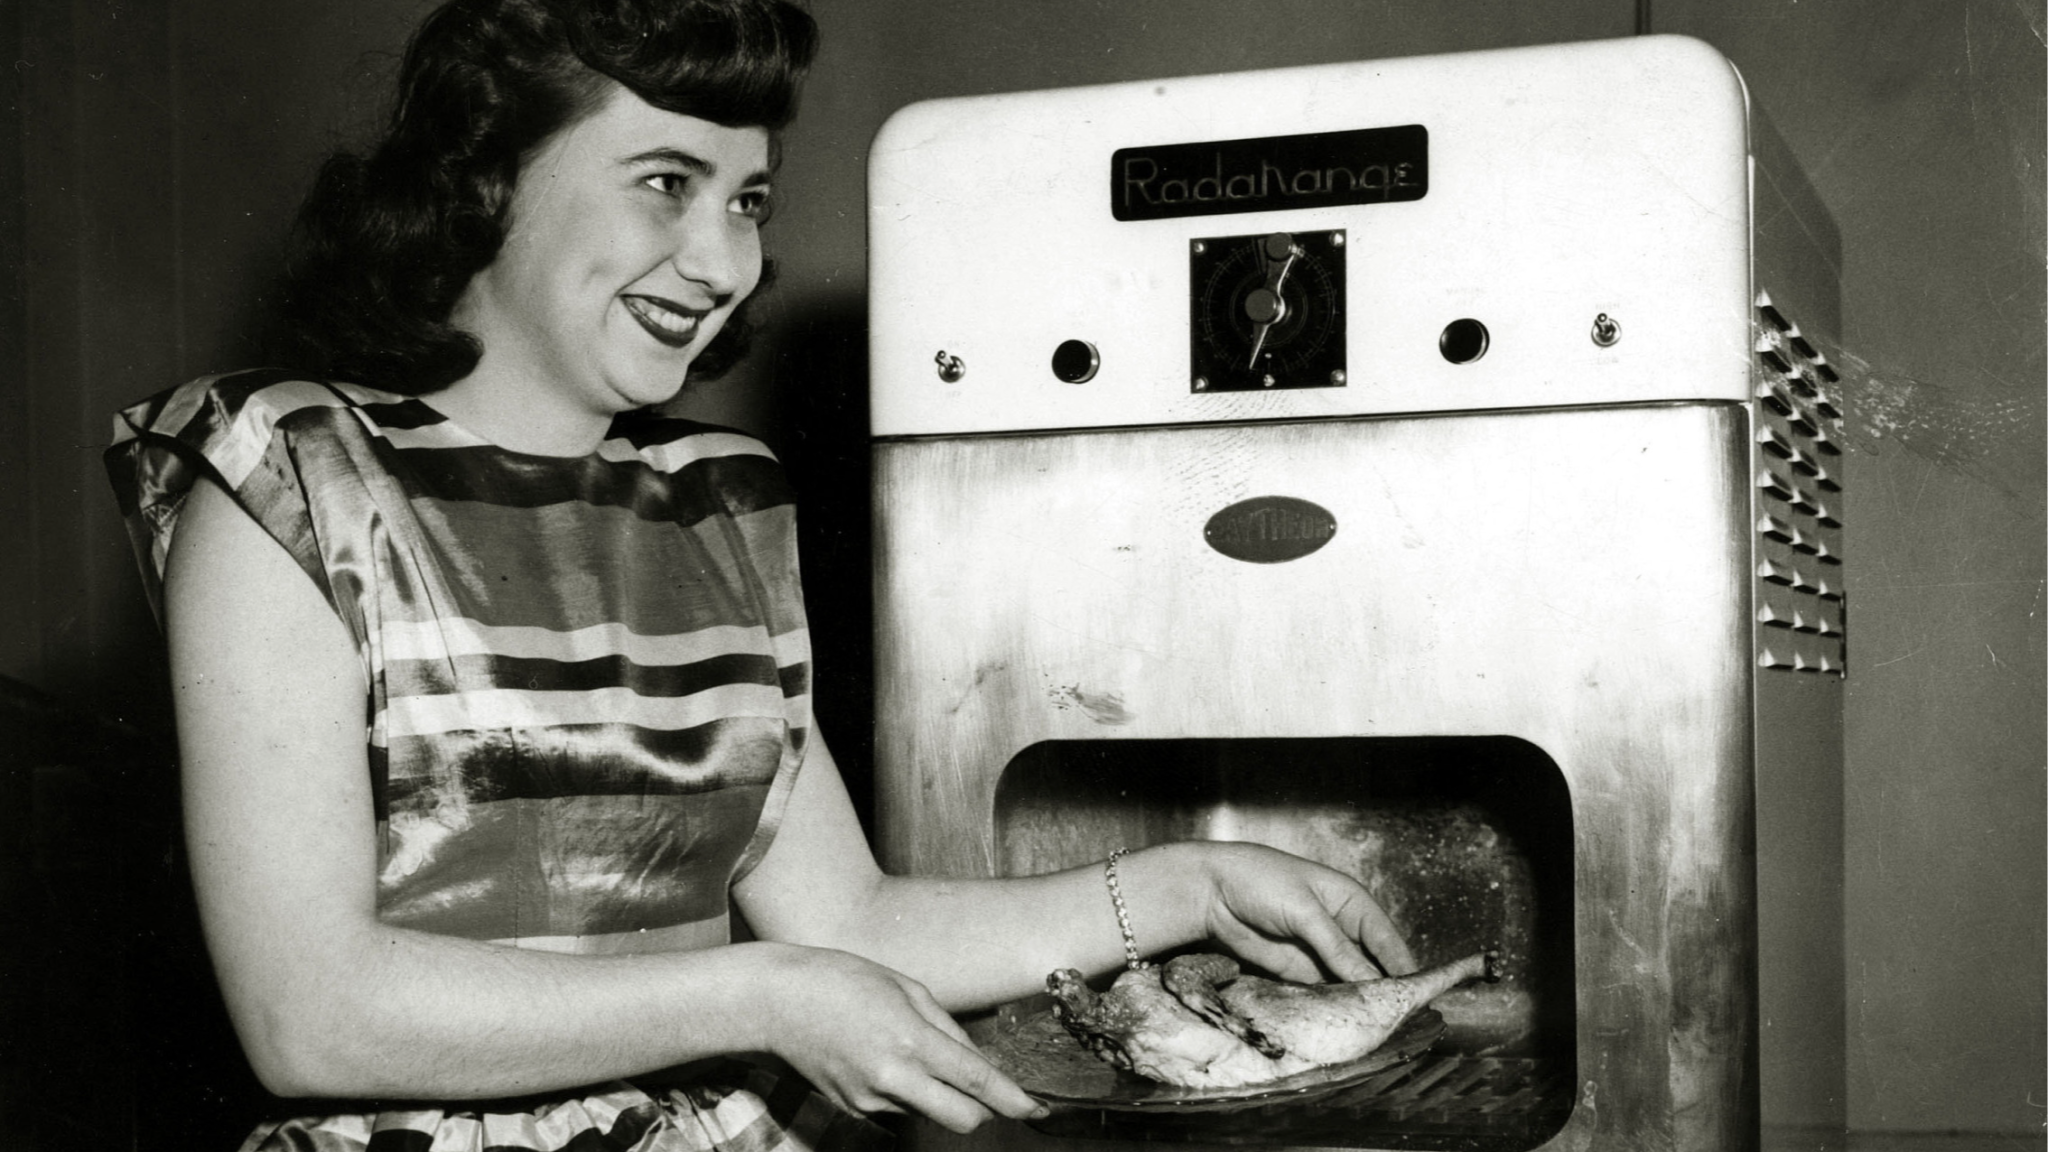 As the energy crisis bites, remember the humble microwave